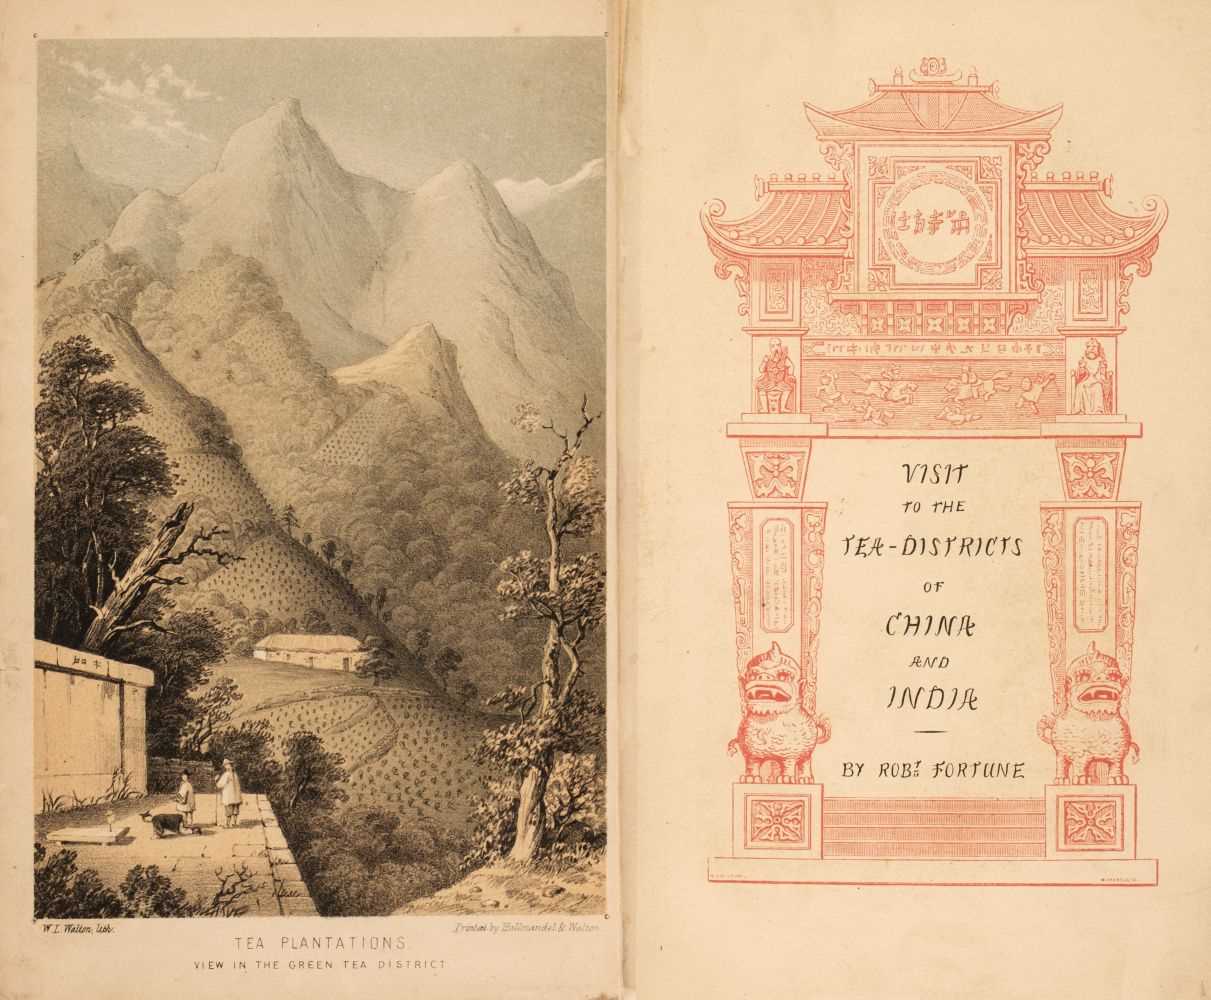 Lot 20 - Fortune (Robert). A Journey to the Tea Countries of China... , 1st edition, John Murray, 1852